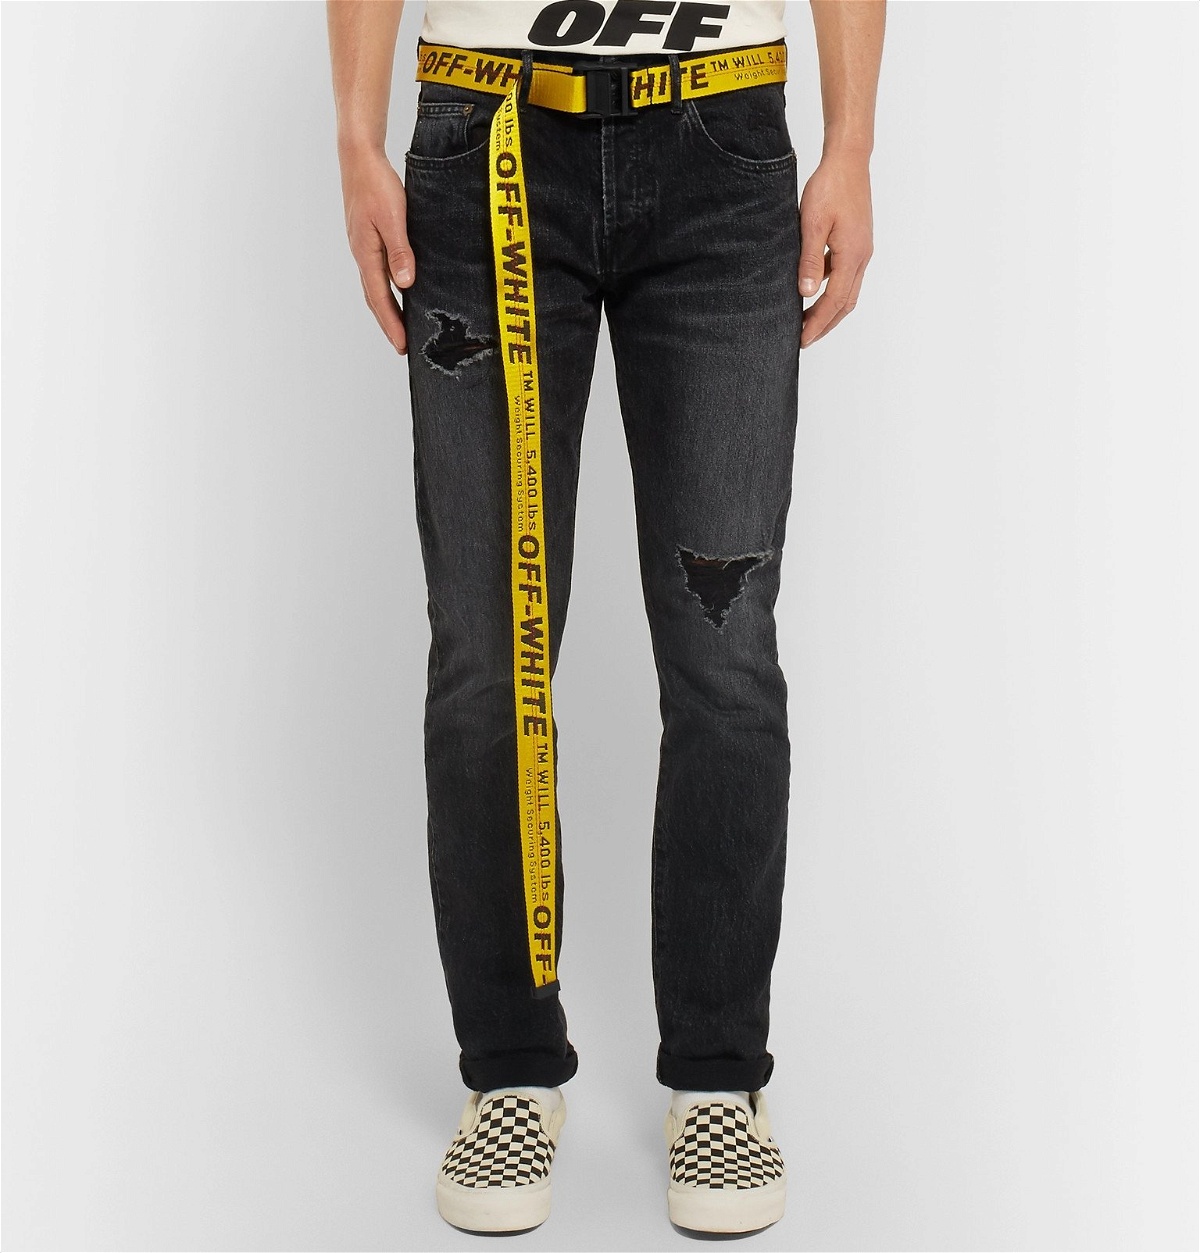 YELLOW INDUSTRIAL BELT off white, Spotern